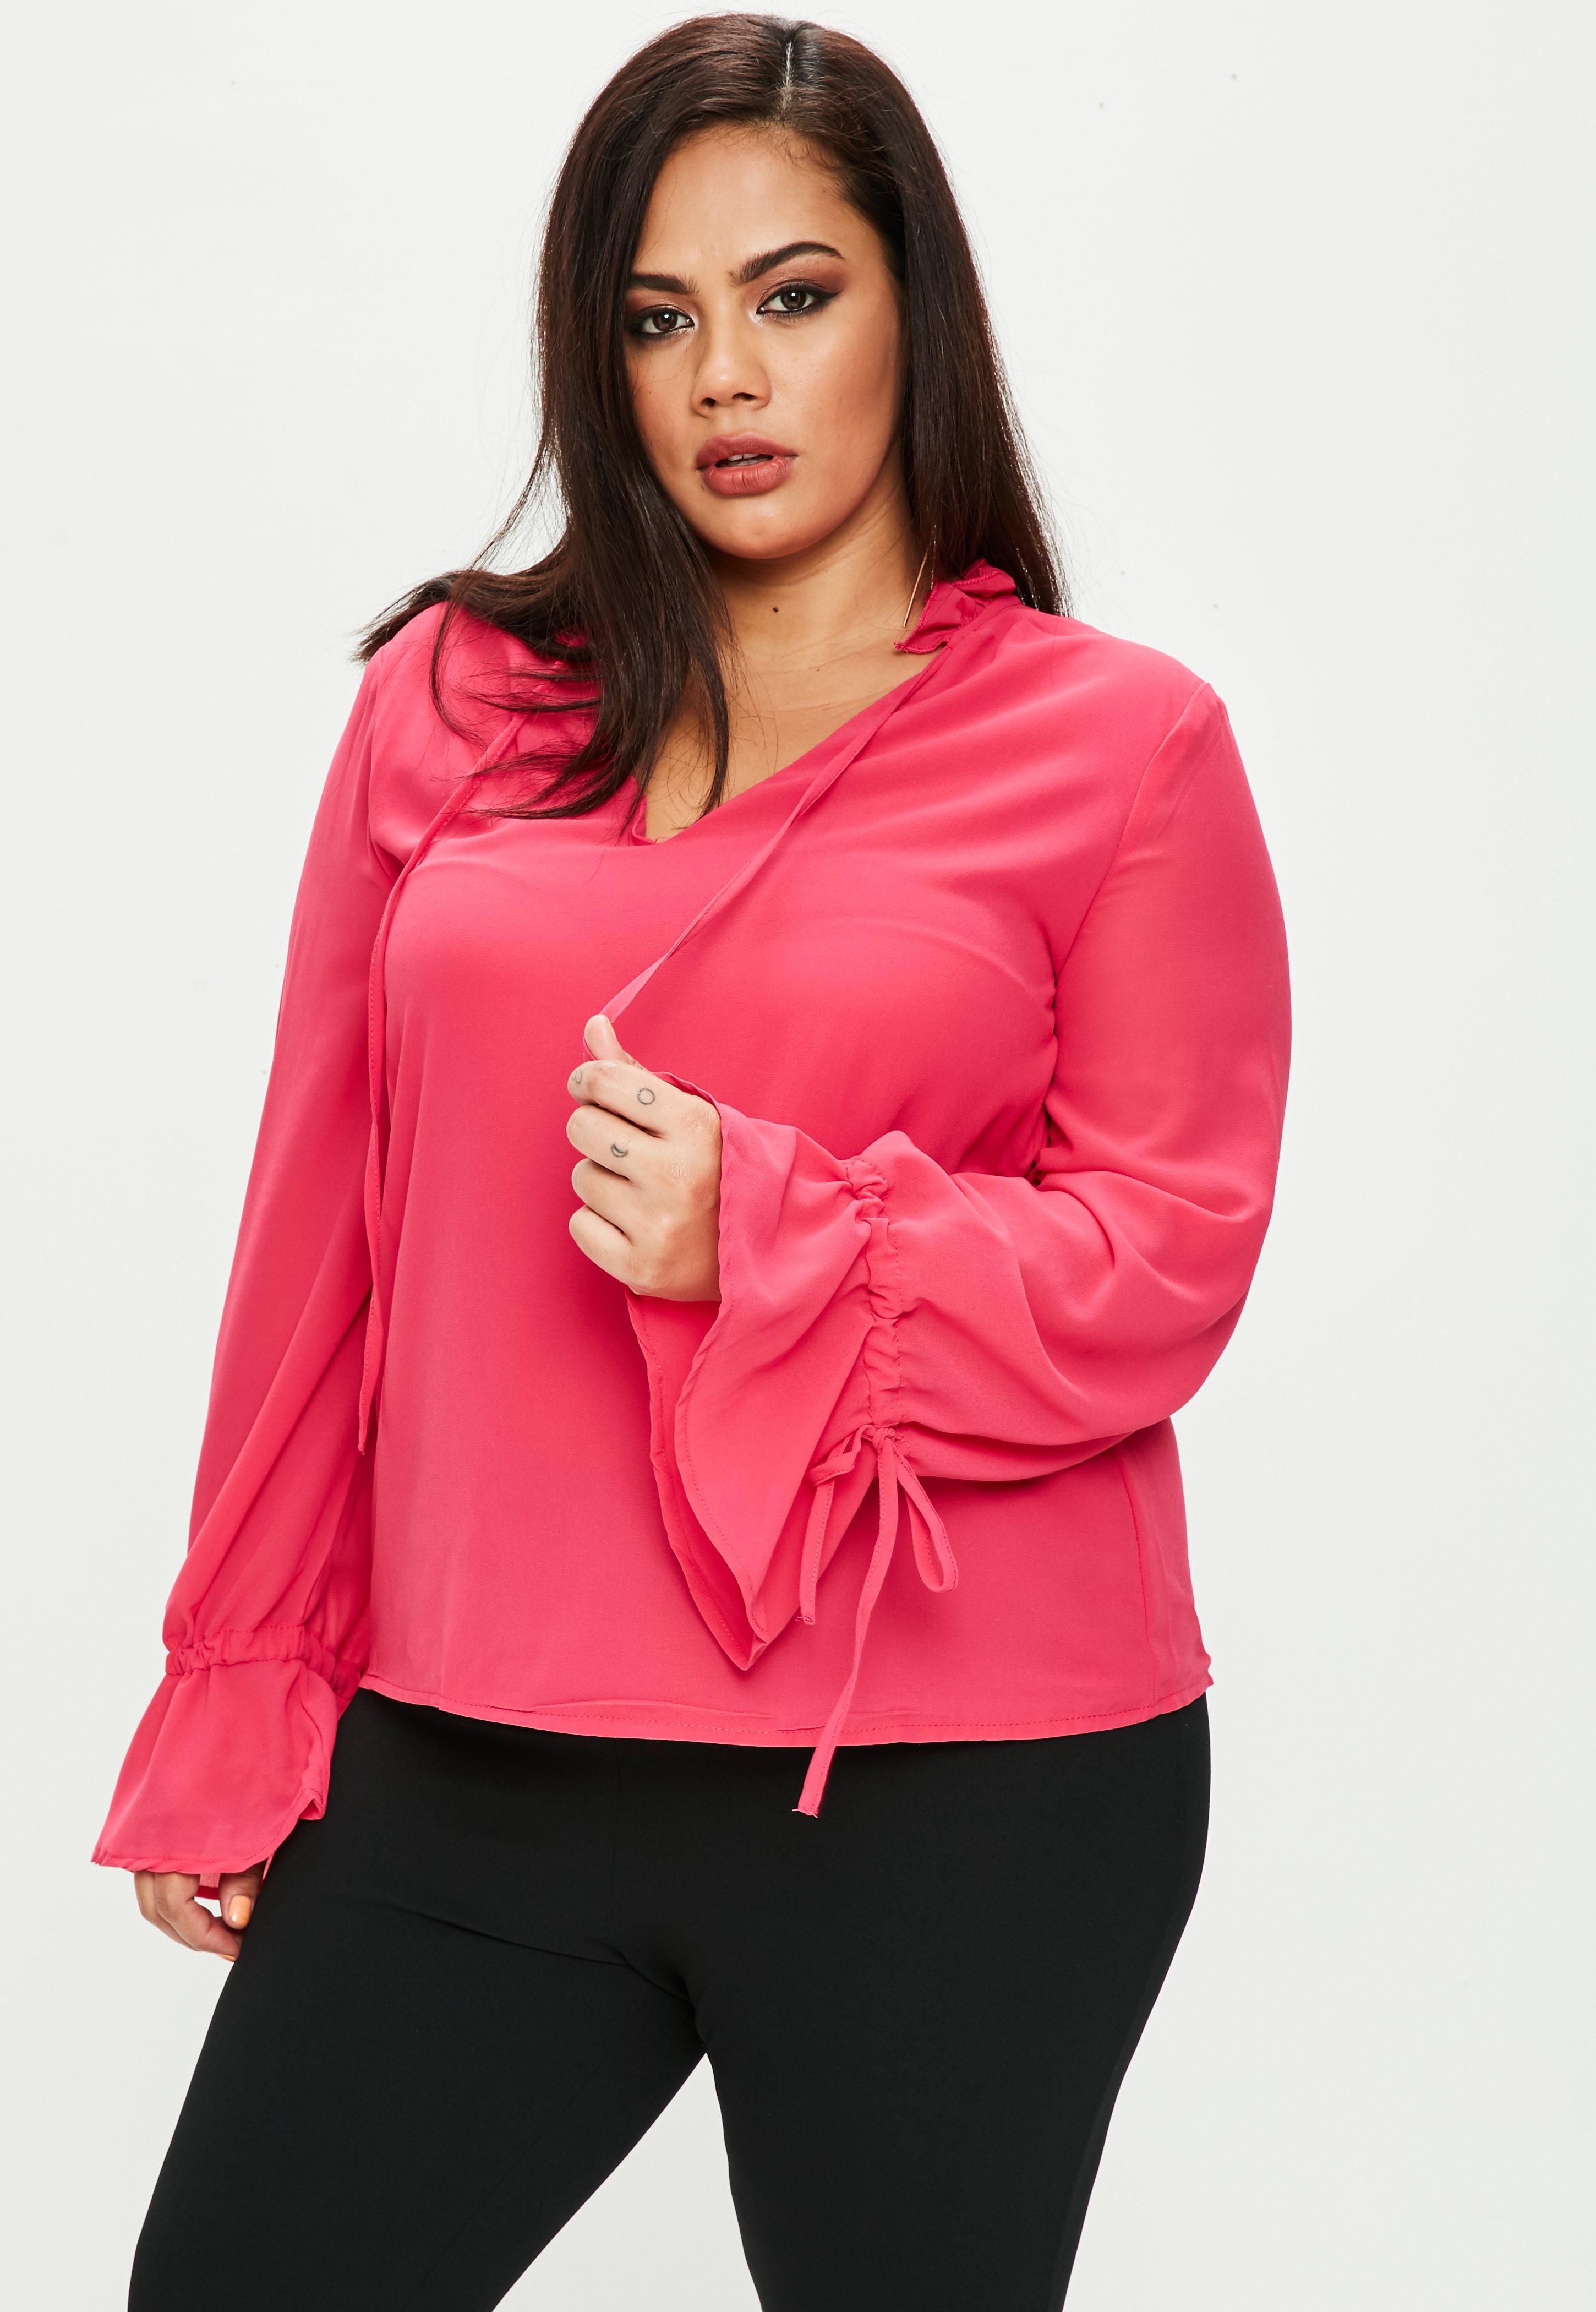 Lyst - Missguided Plus Size Pink Tie Neck Blouse in Pink